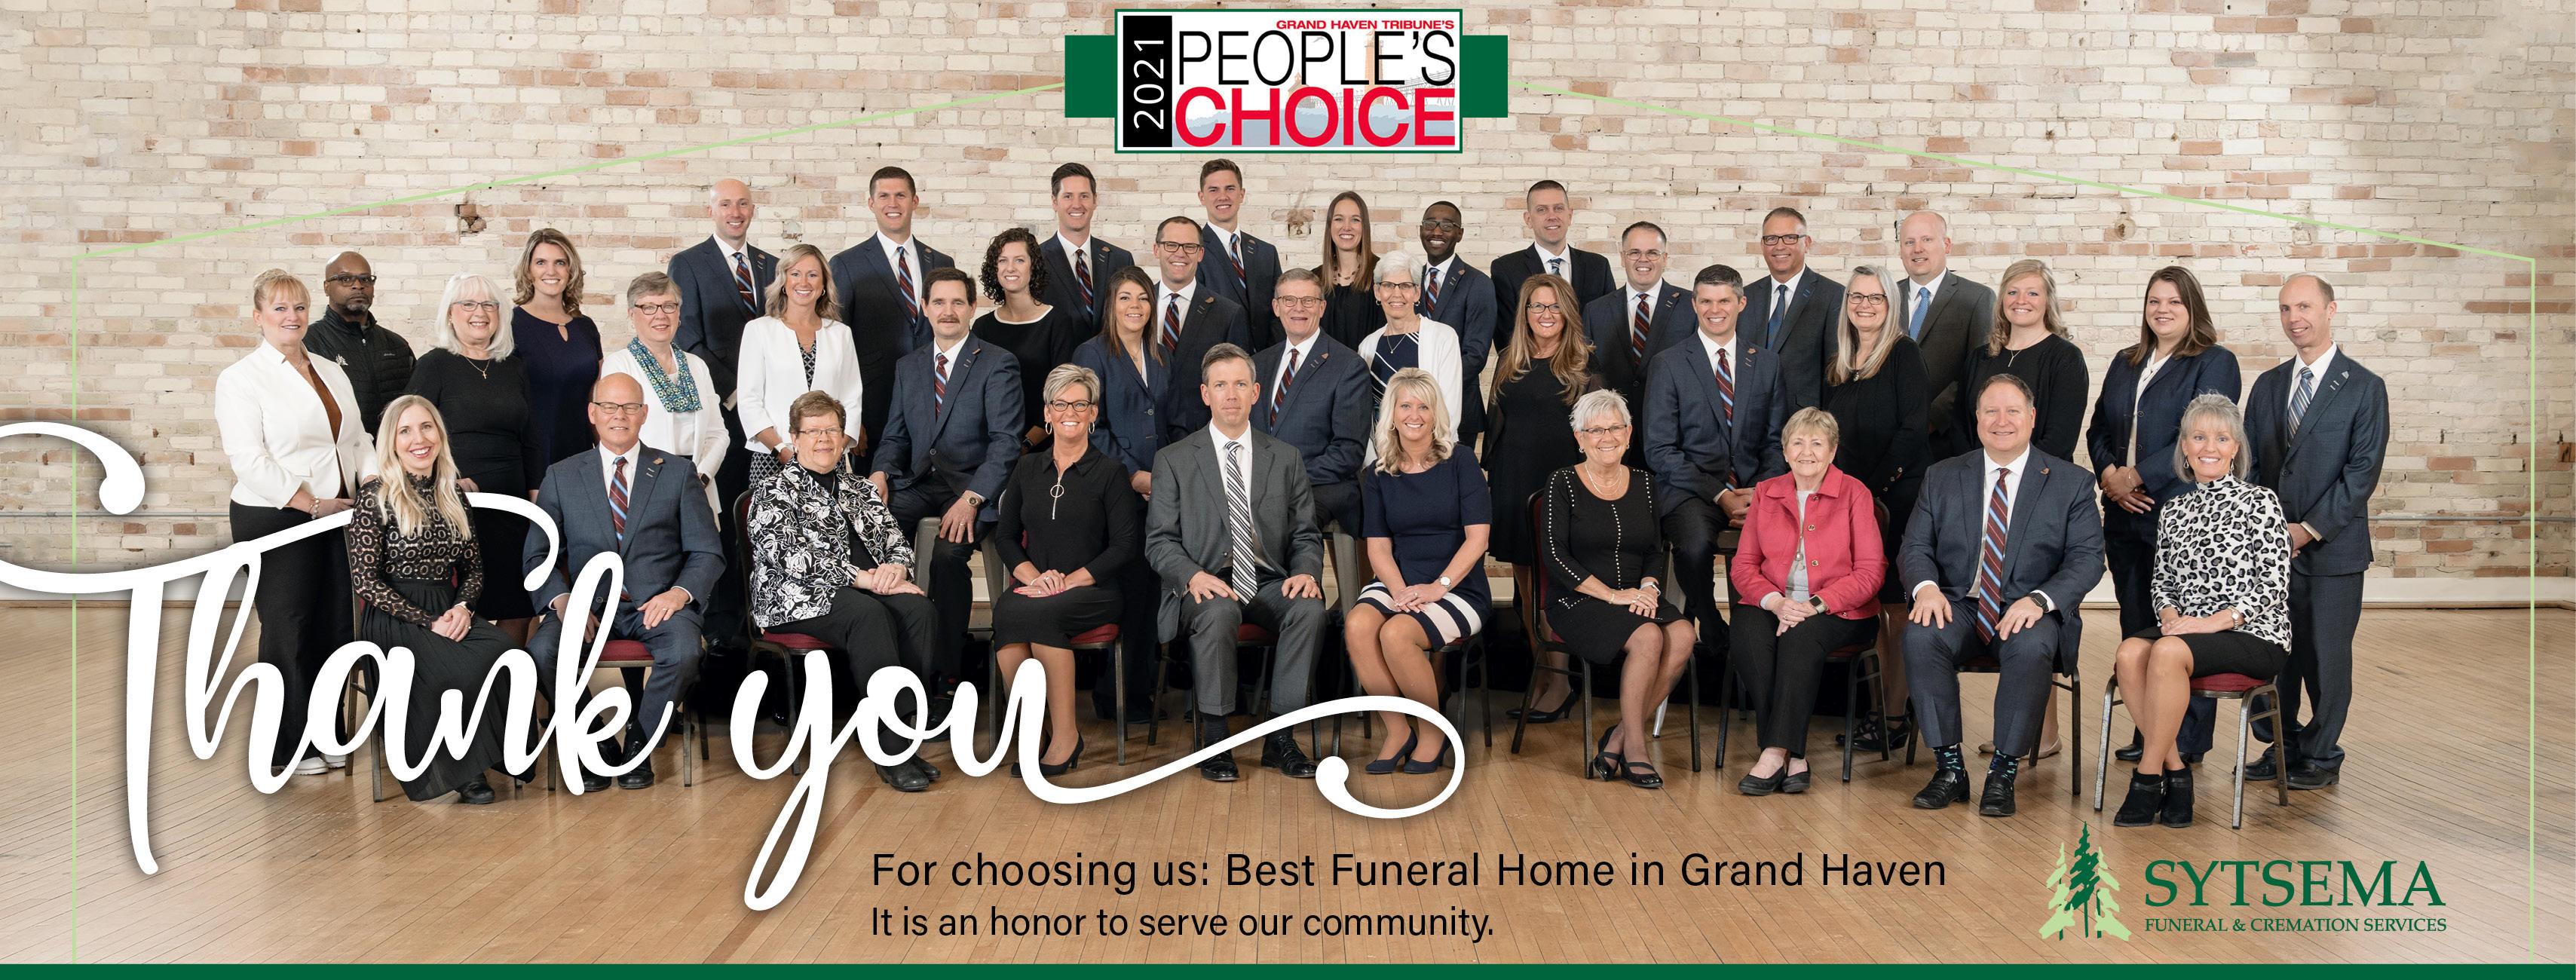 Thank you for choosing us as the Best Funeral Home in Grand Haven! It is an honor to serve our community.